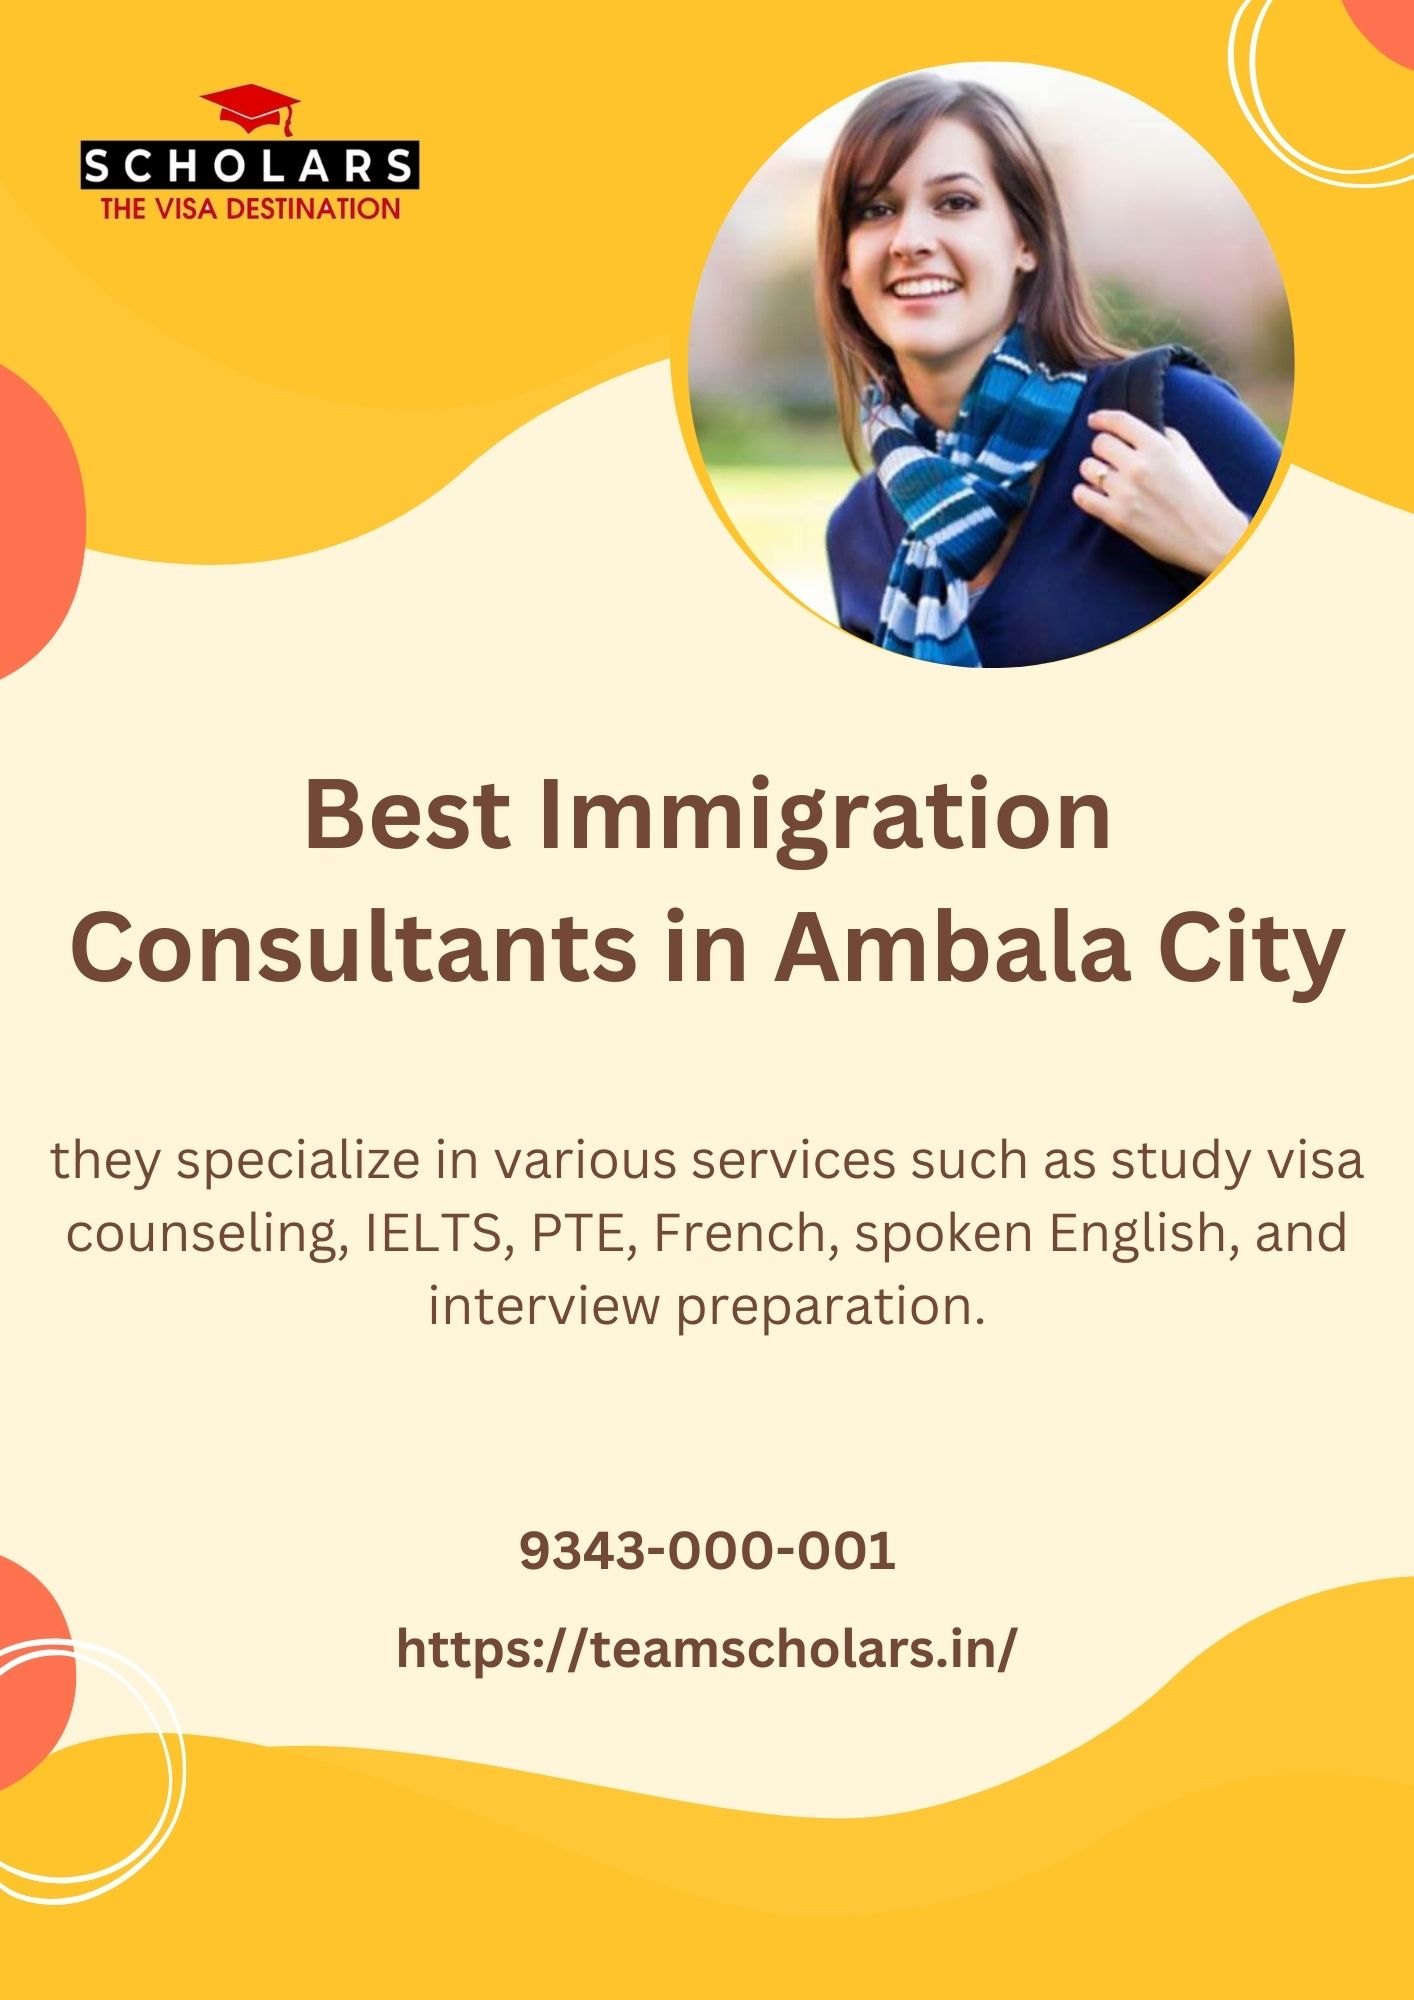 Best Immigration Consultants in Ambala City